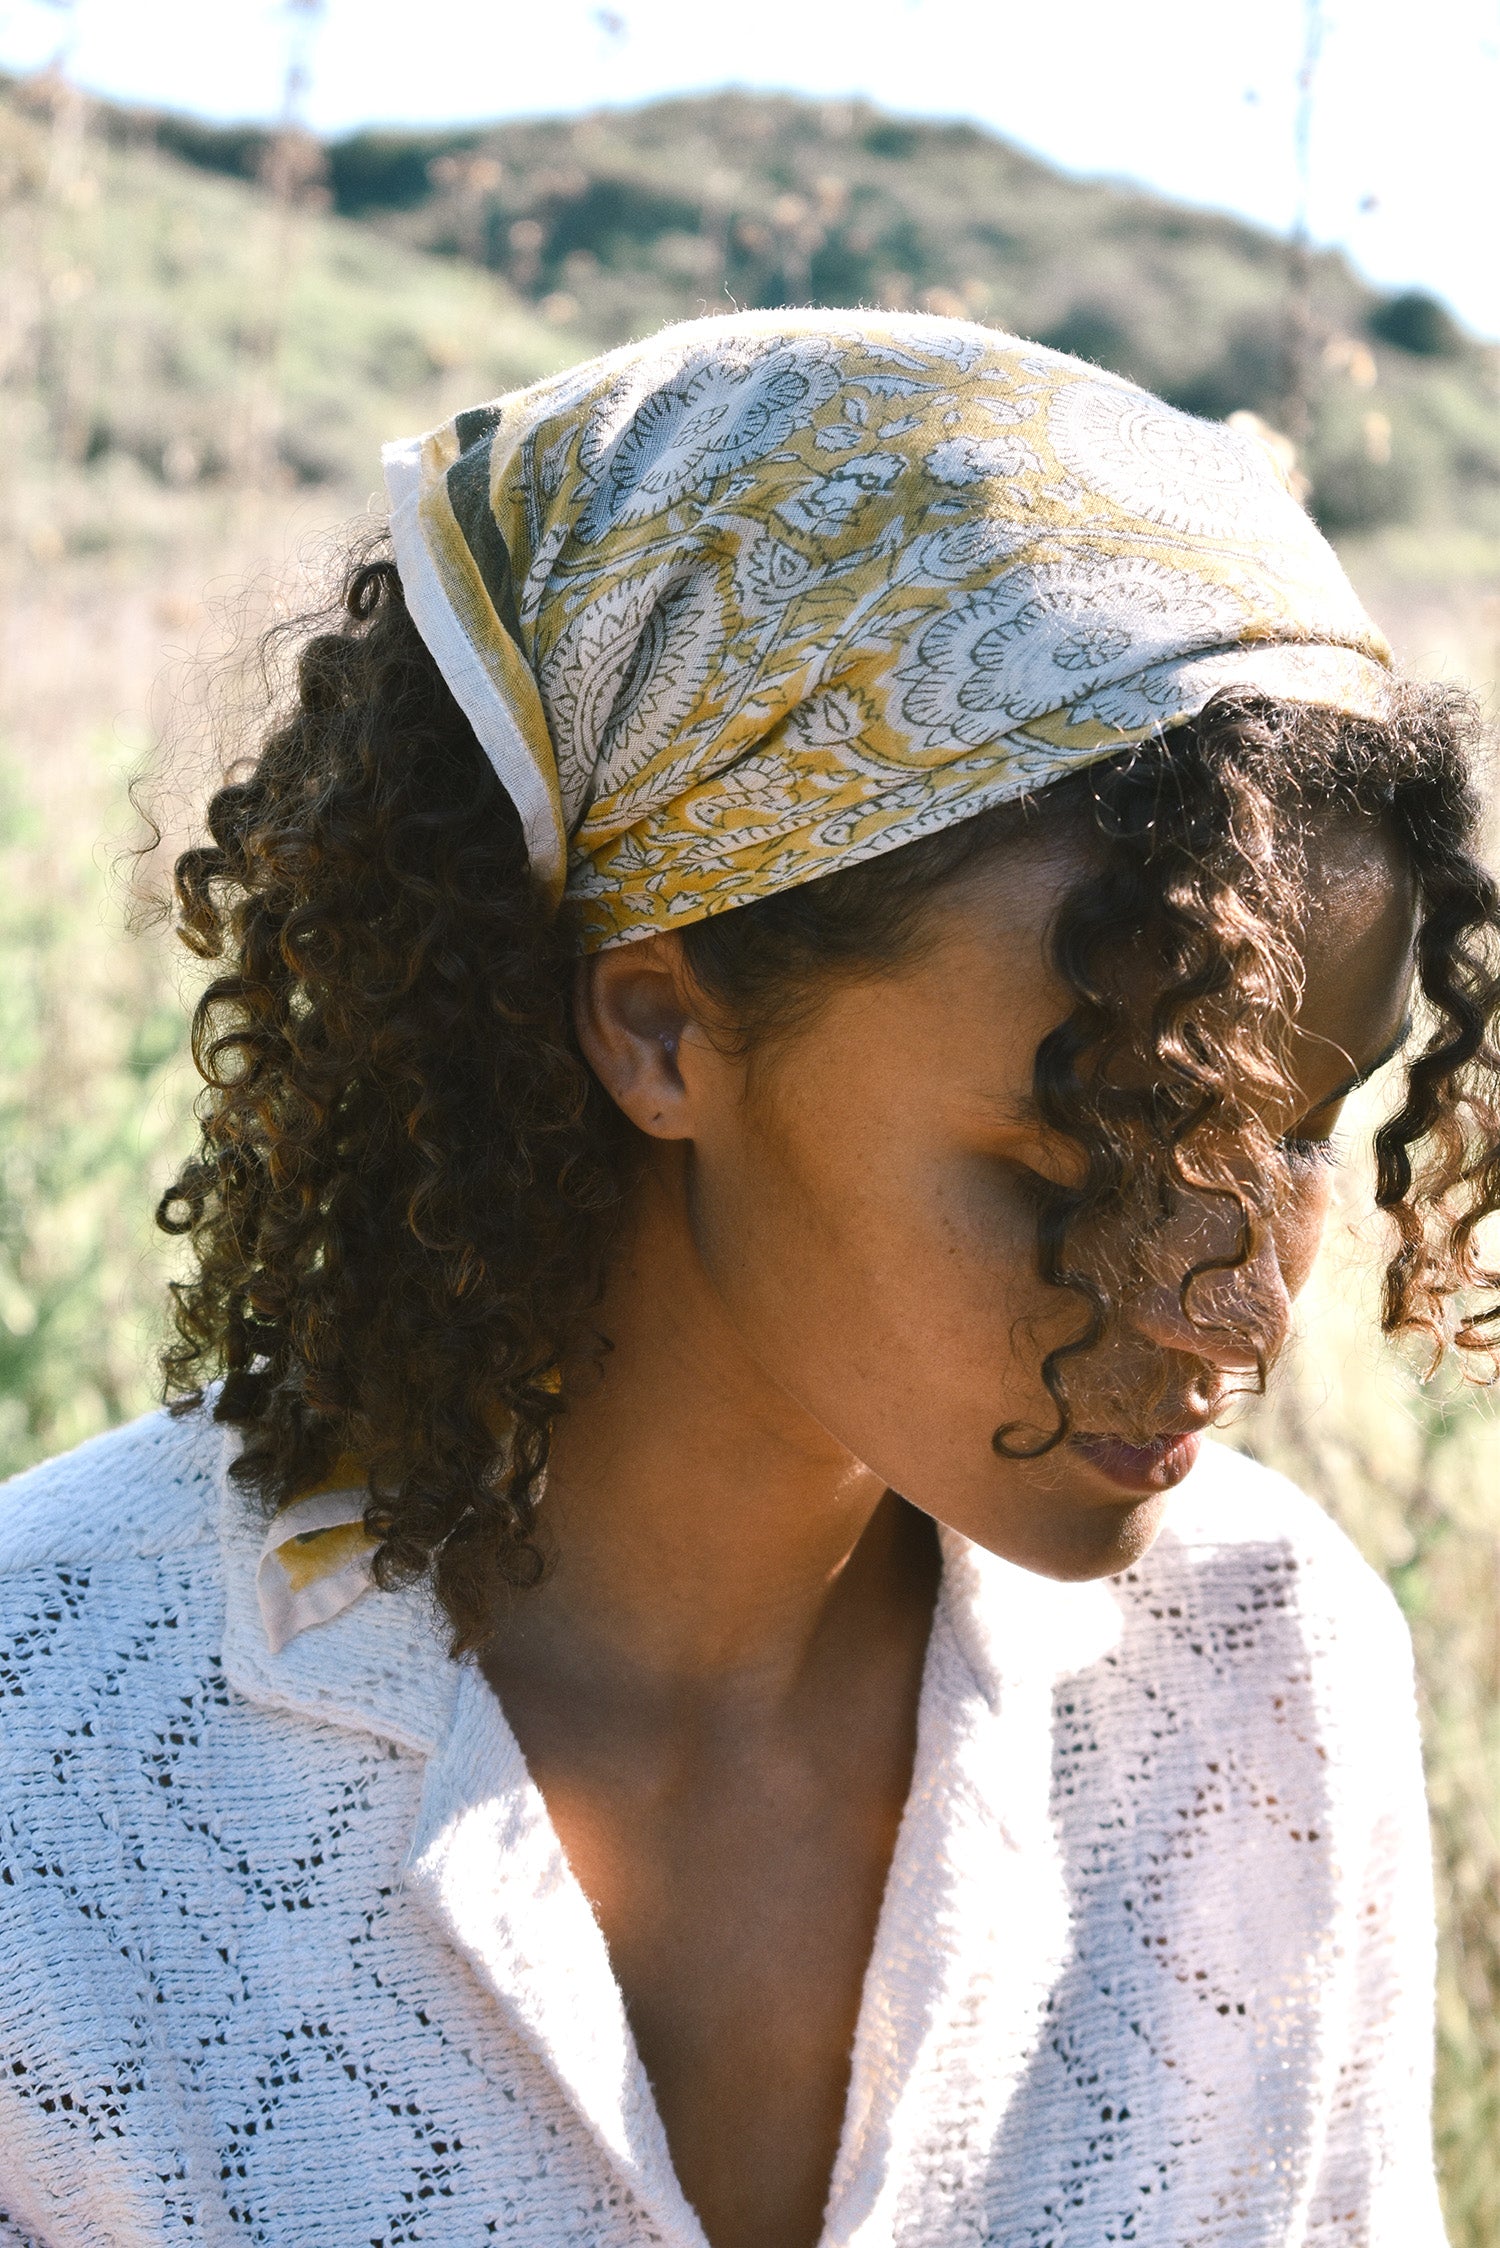 Woman wearing block print Tate bandana wrapped around the hair. Woman wearing a white, collared shirt. Foliage in the background.